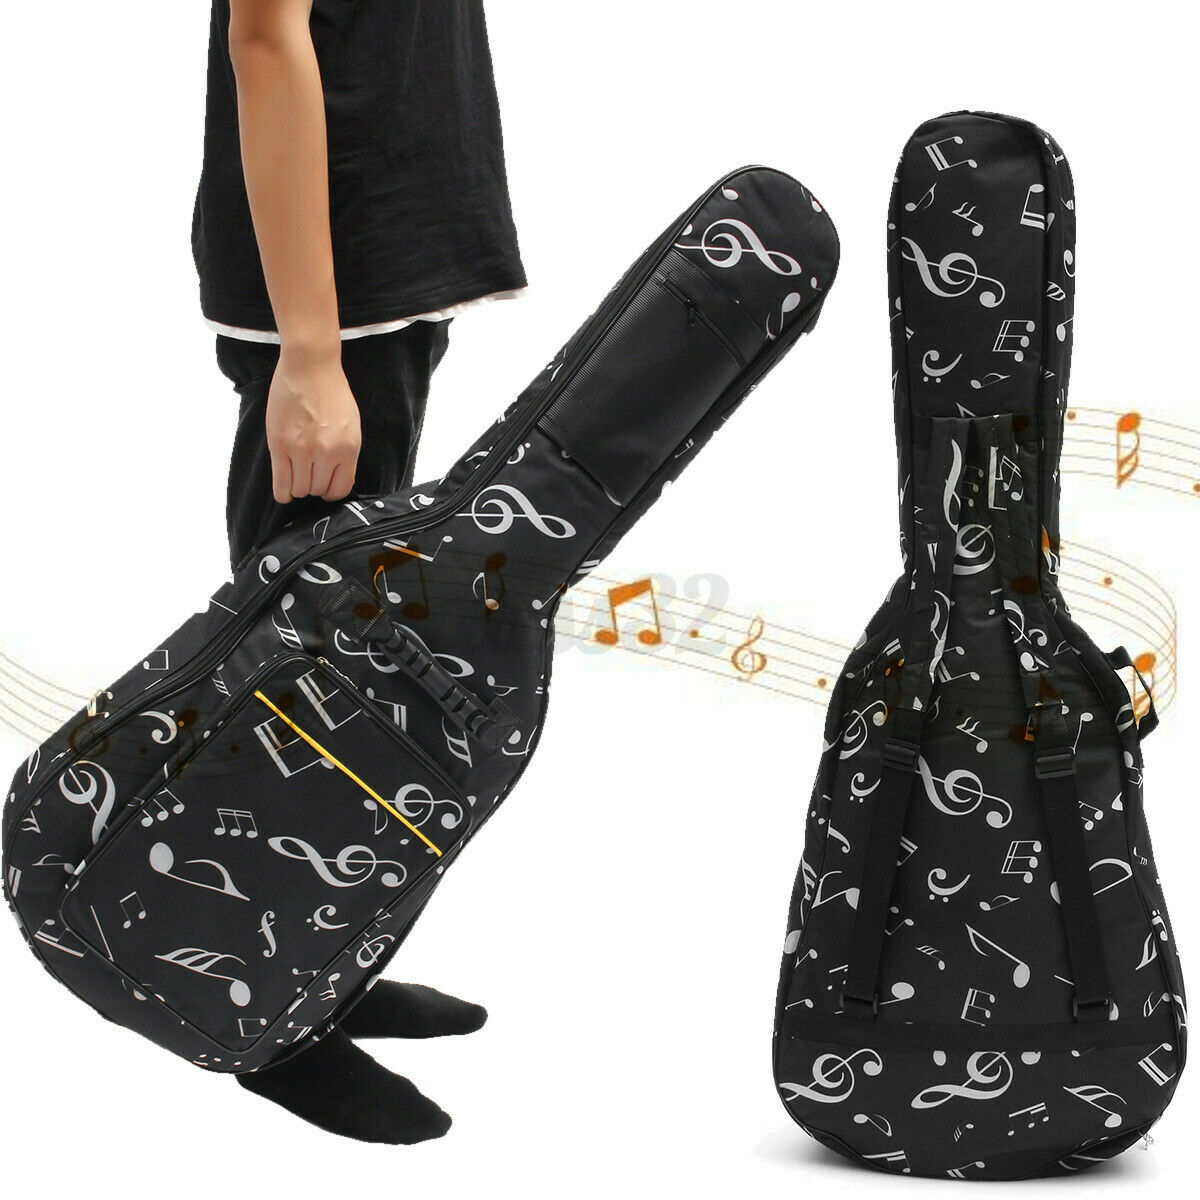 39-41'' Double Straps Padded Guitar Bag Case Acoustic Guitar Waterproof Oxford